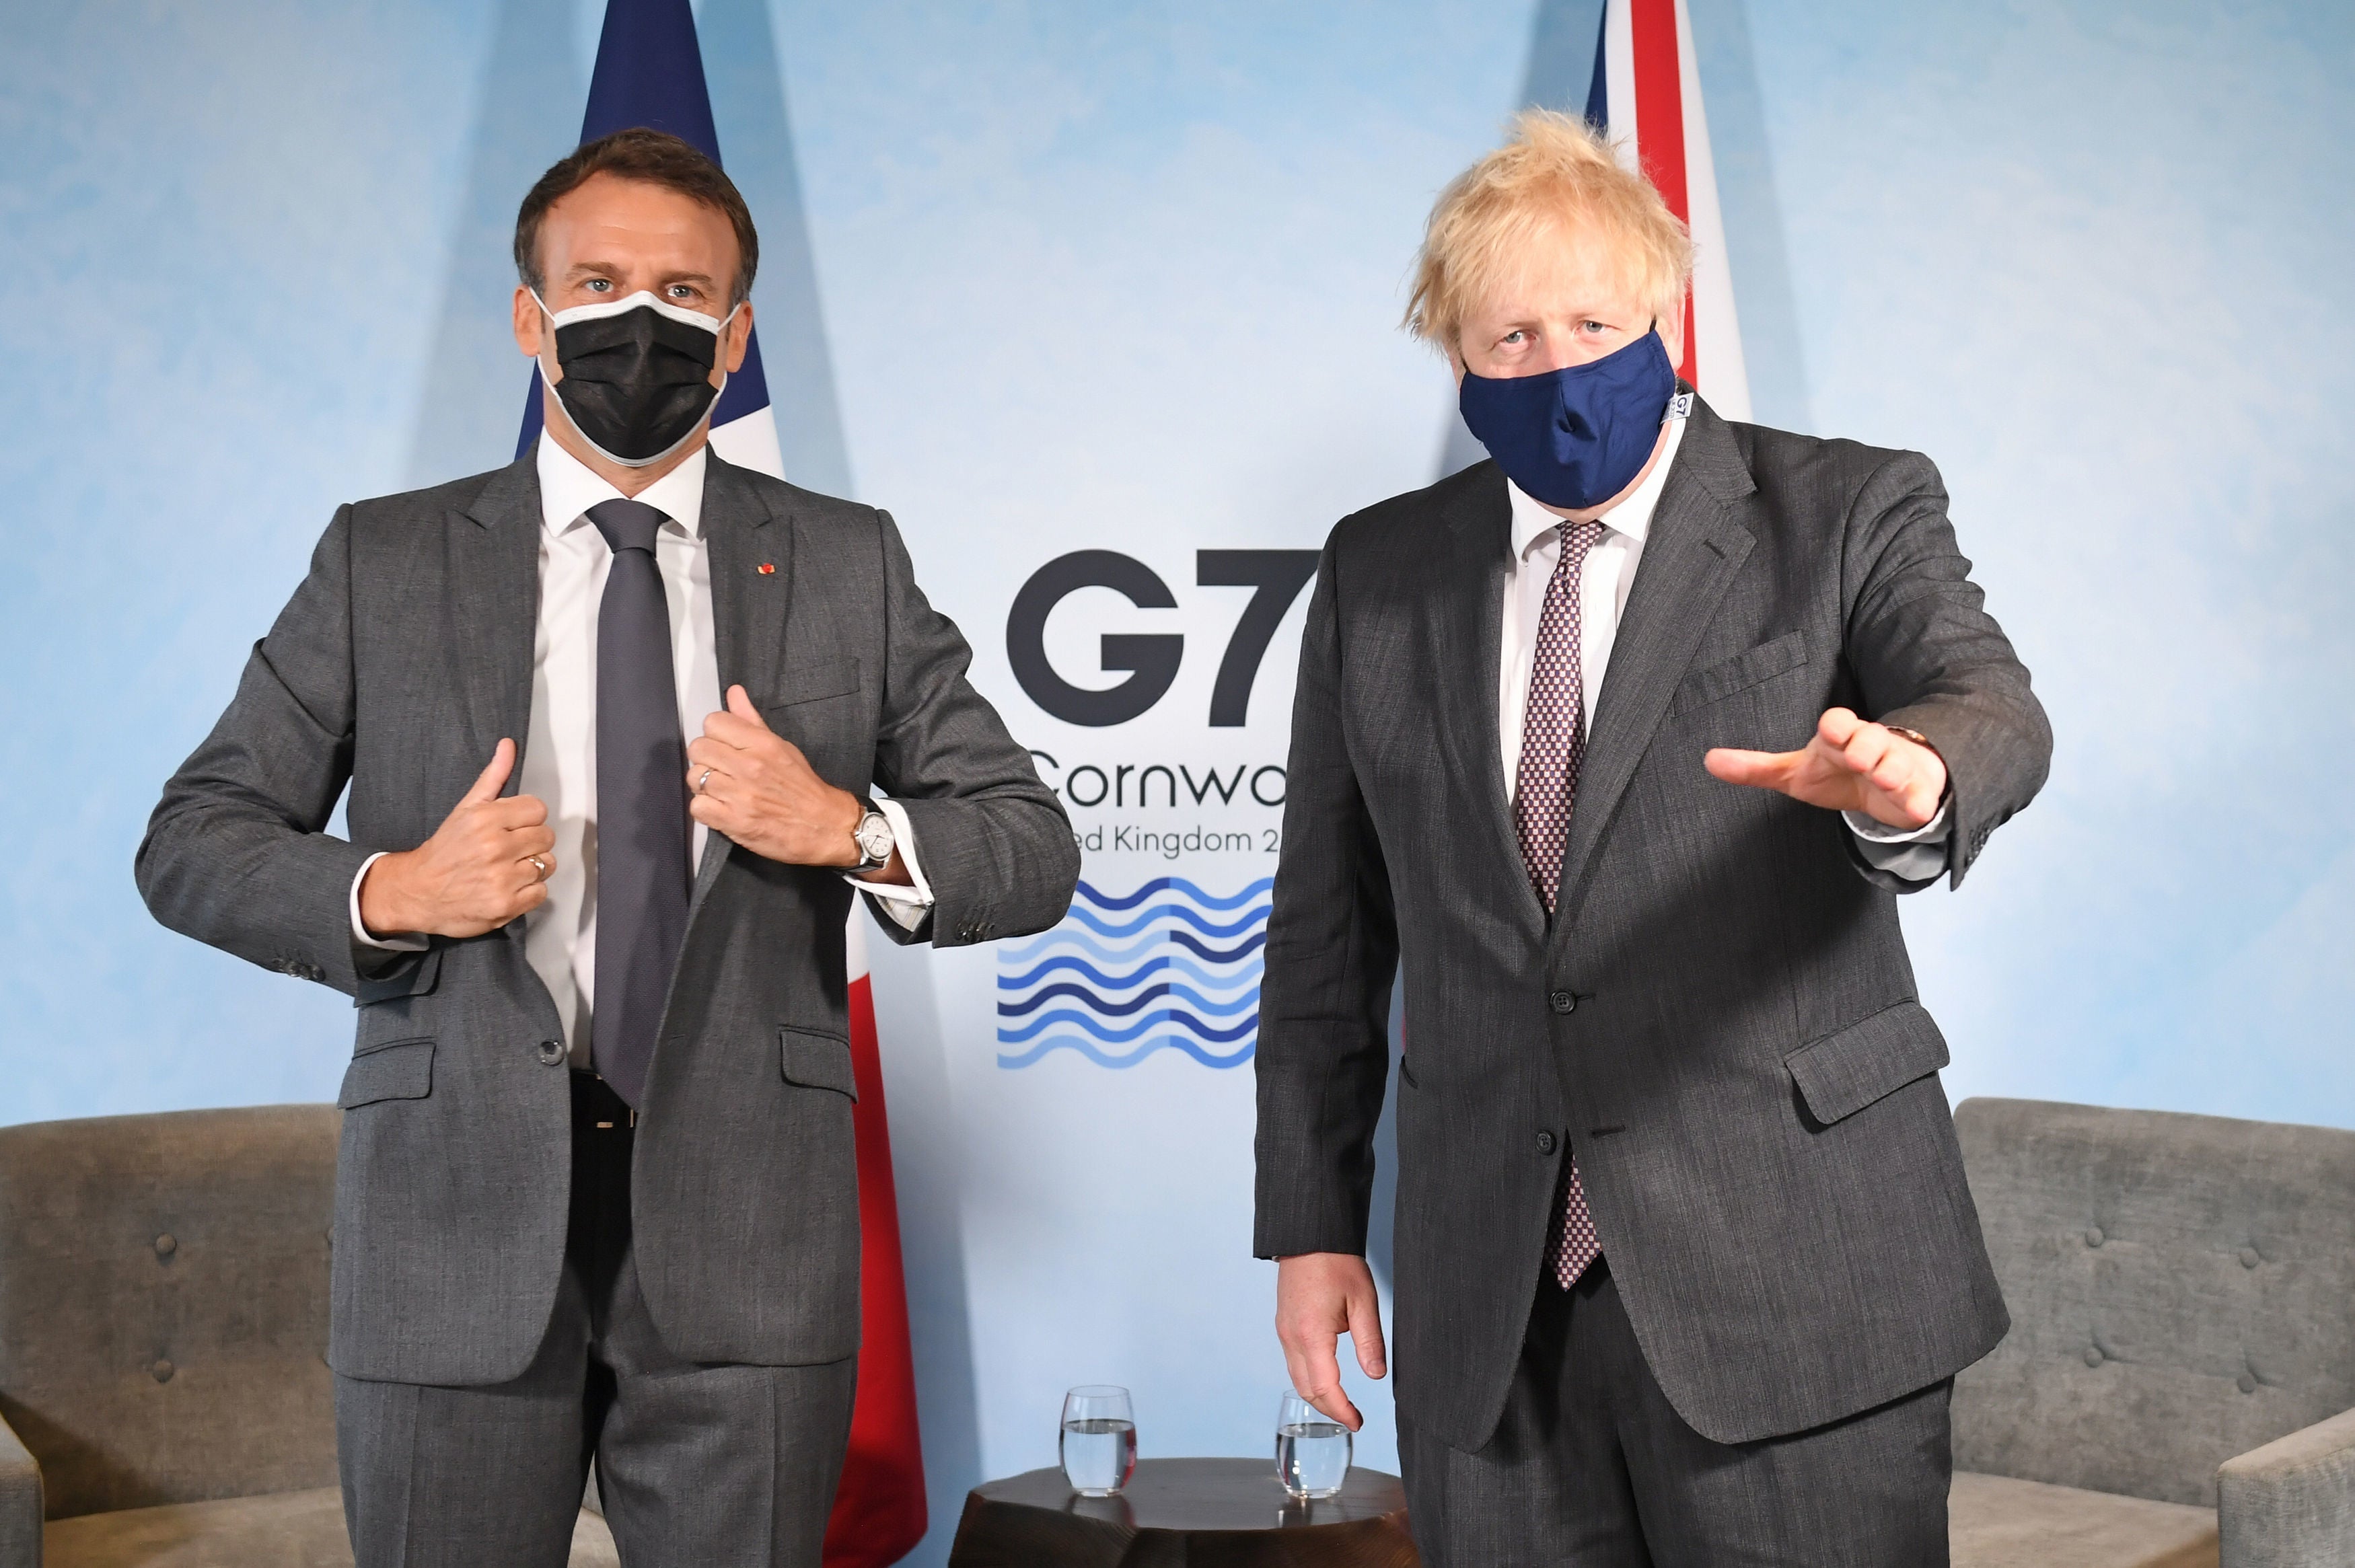 Boris Johnson and Emmanuel Macron have clashed over Northern Ireland and Brexit at the G7 summit in Cornwall